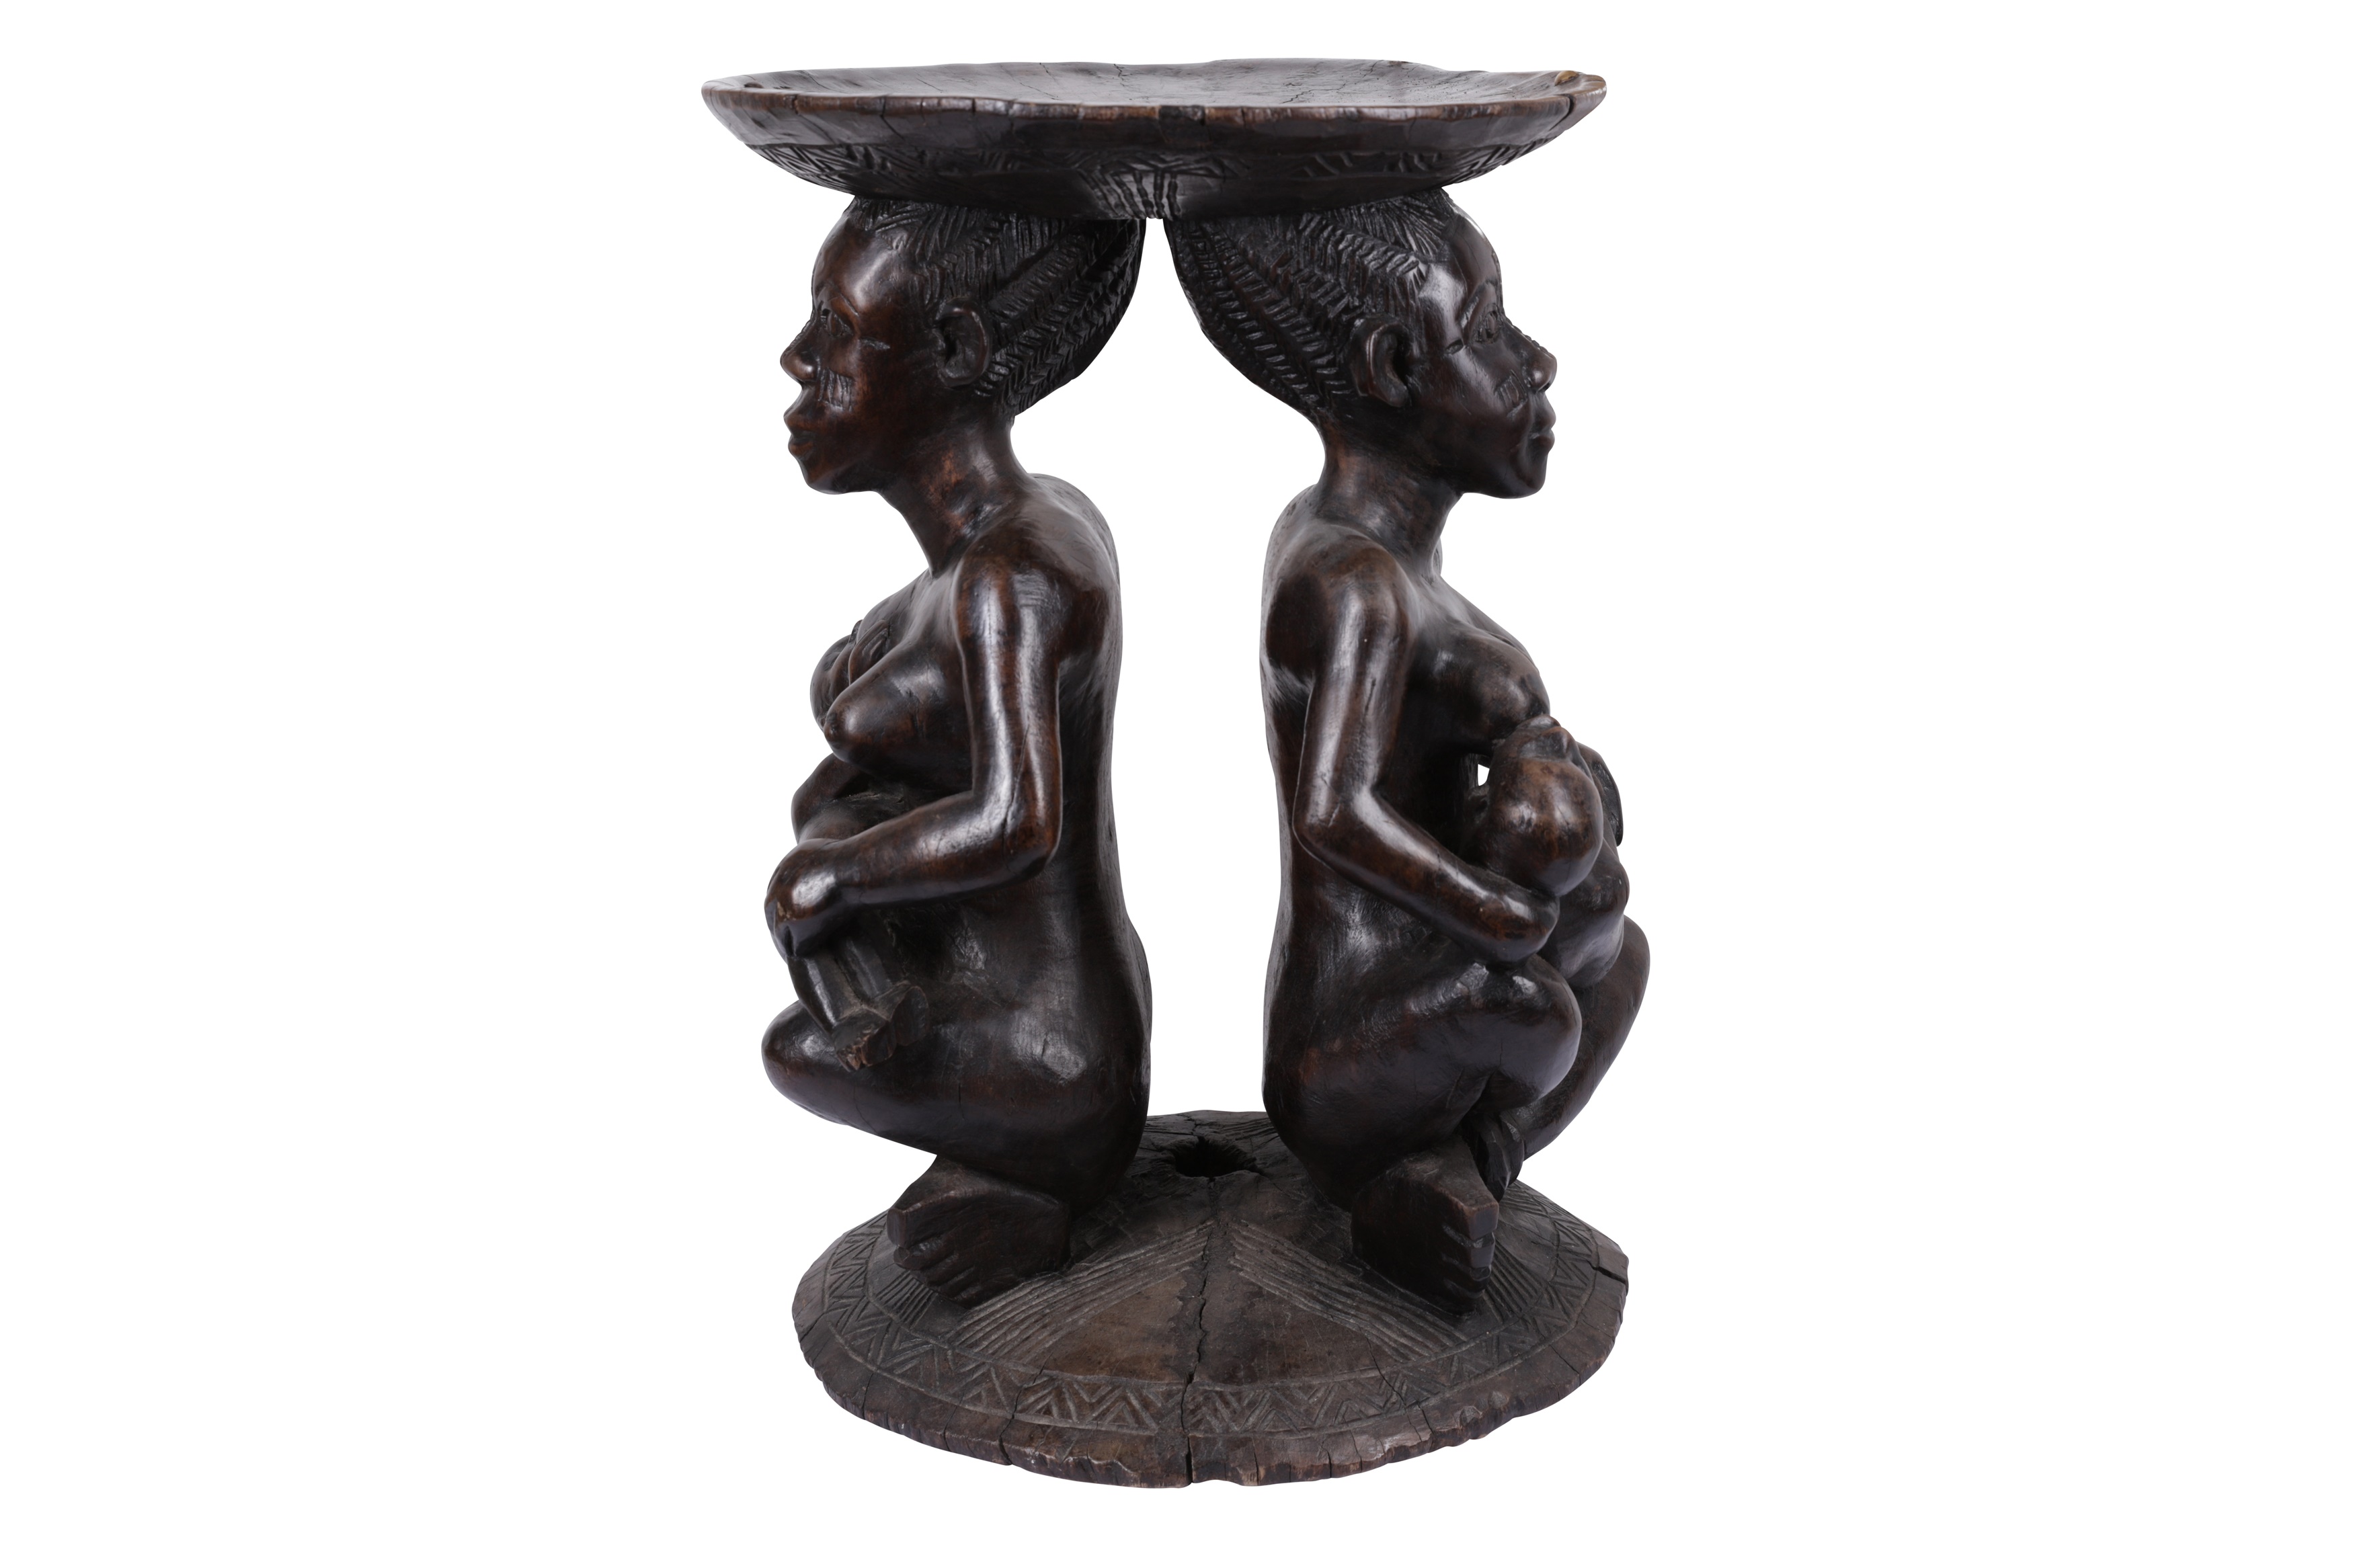 A WEST AFRICAN TRIBAL CARVED HARDWOOD MATERNITY FIGURE STOOL / TABLE - Image 3 of 6